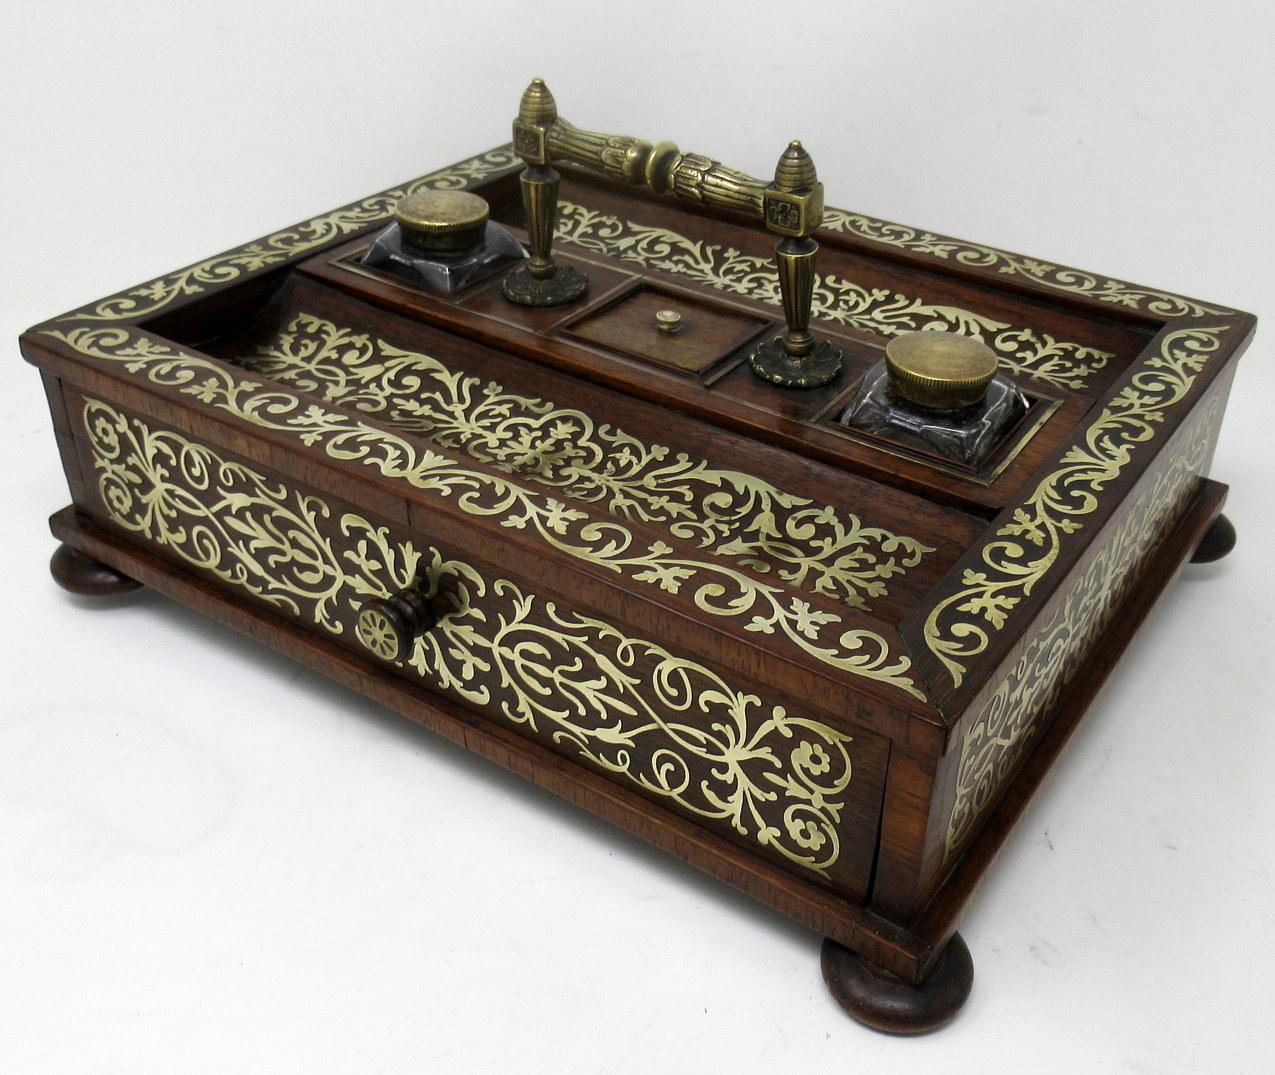 Stunning and Rare Example of an English Grand Tour Regency period brass inlaid Mahogany Inkstand of rectangular outline and generous proportions. First quarter of the Nineteenth Century. 

The entire outer main area with lavish polished brass inlay